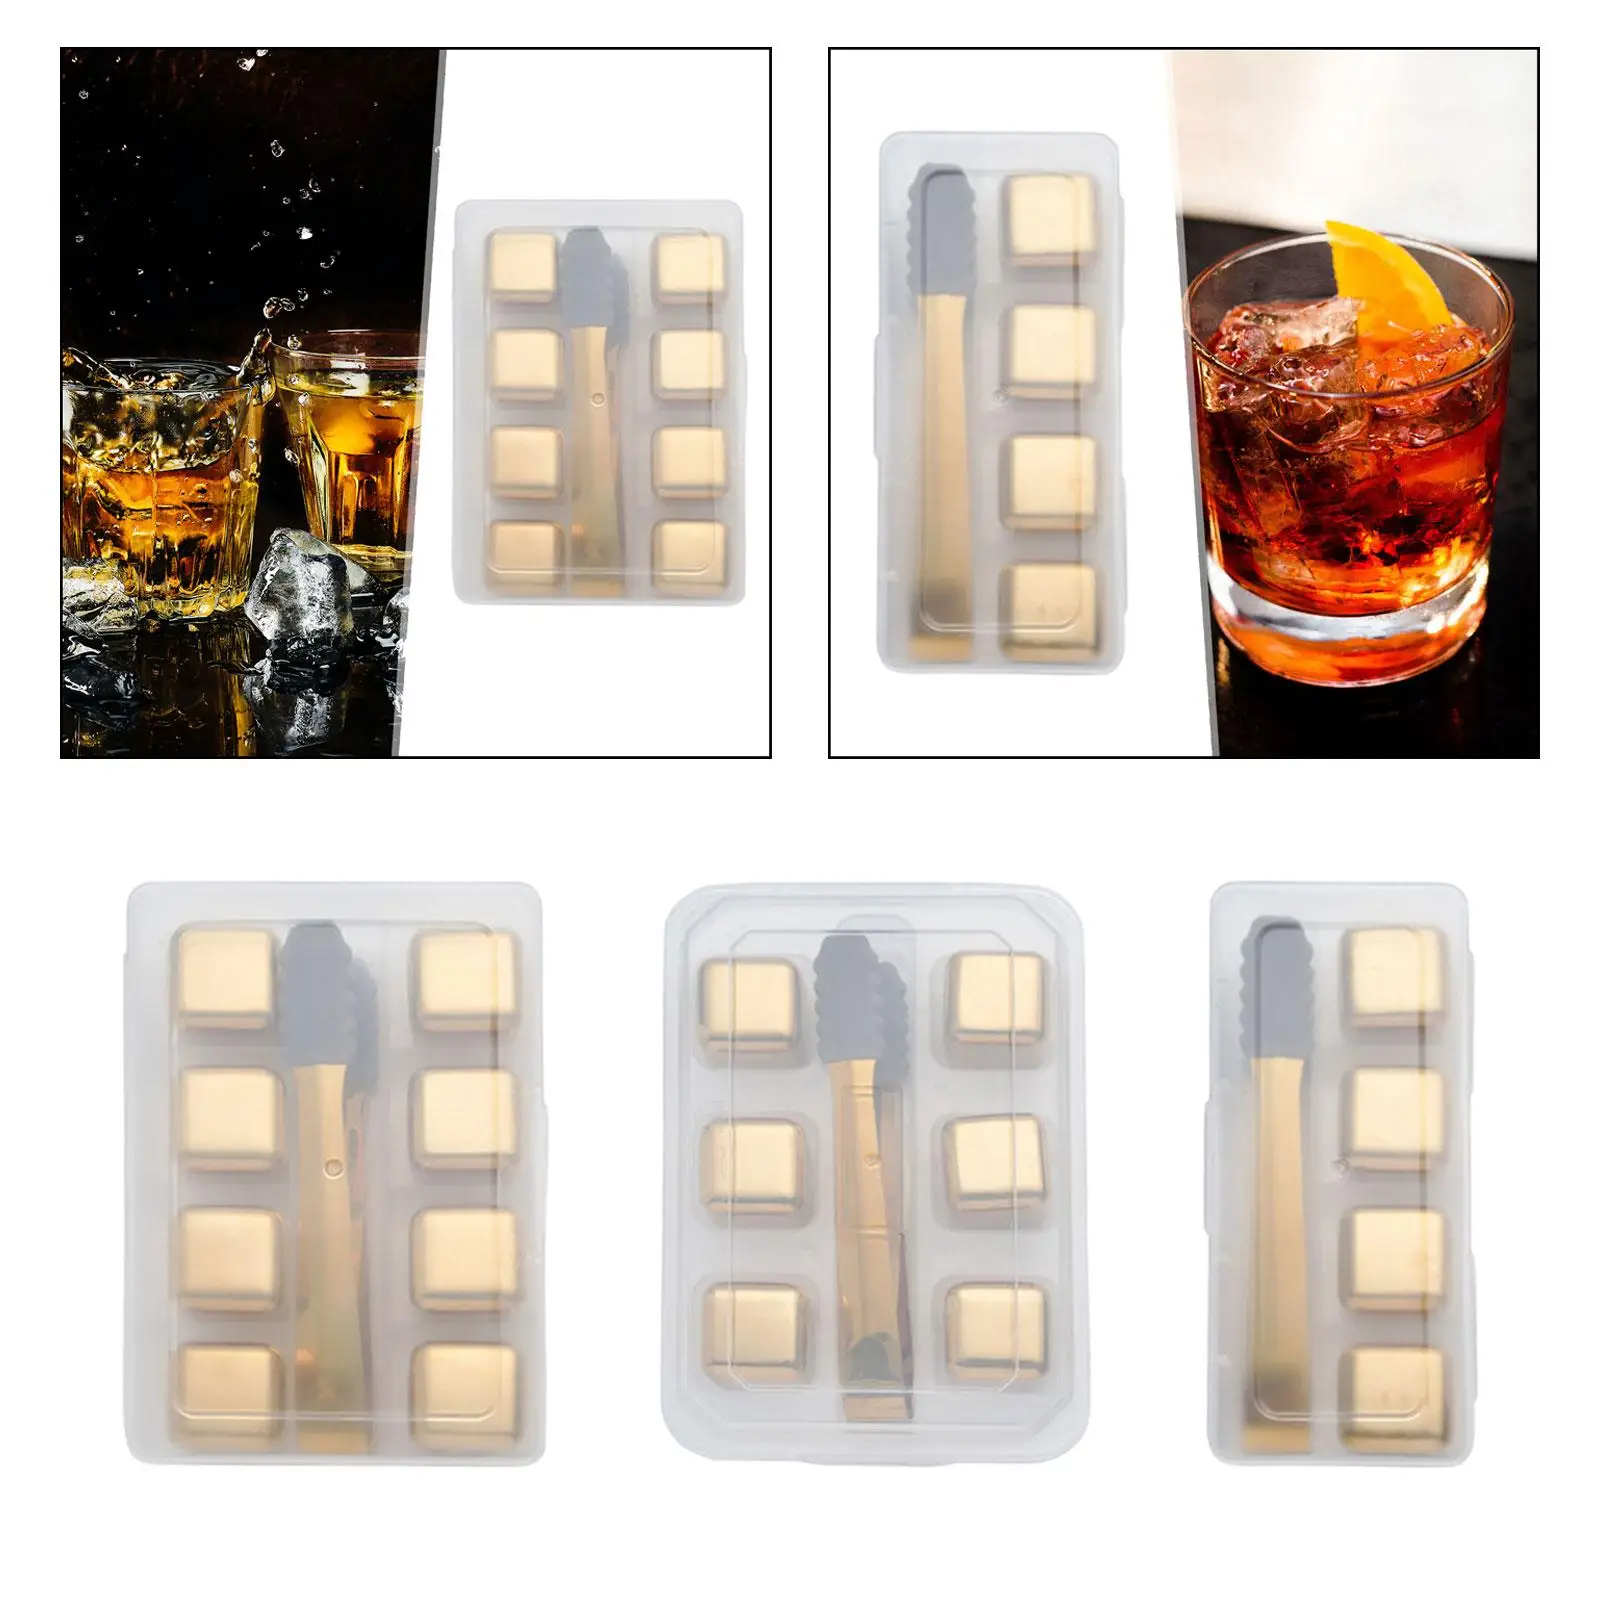 Stainless Steel Ice Cube Reusable Beverage Chilling Rocks for Tea Coffee Bar